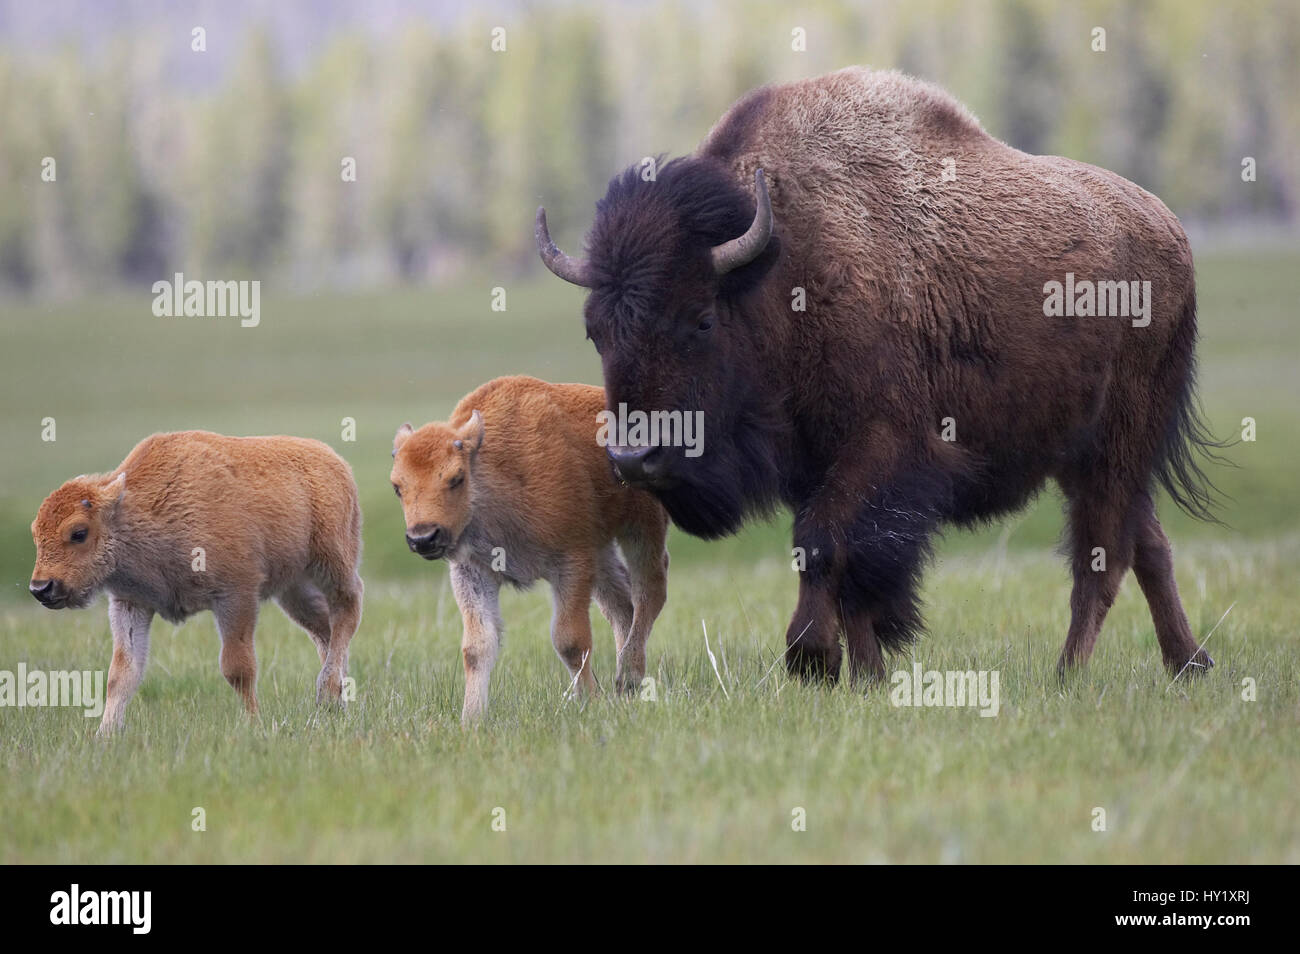 Bison (Bison bison) mother with two calves in summer meadow. Yellowstone National Park, Wyoming, USA. Stock Photo